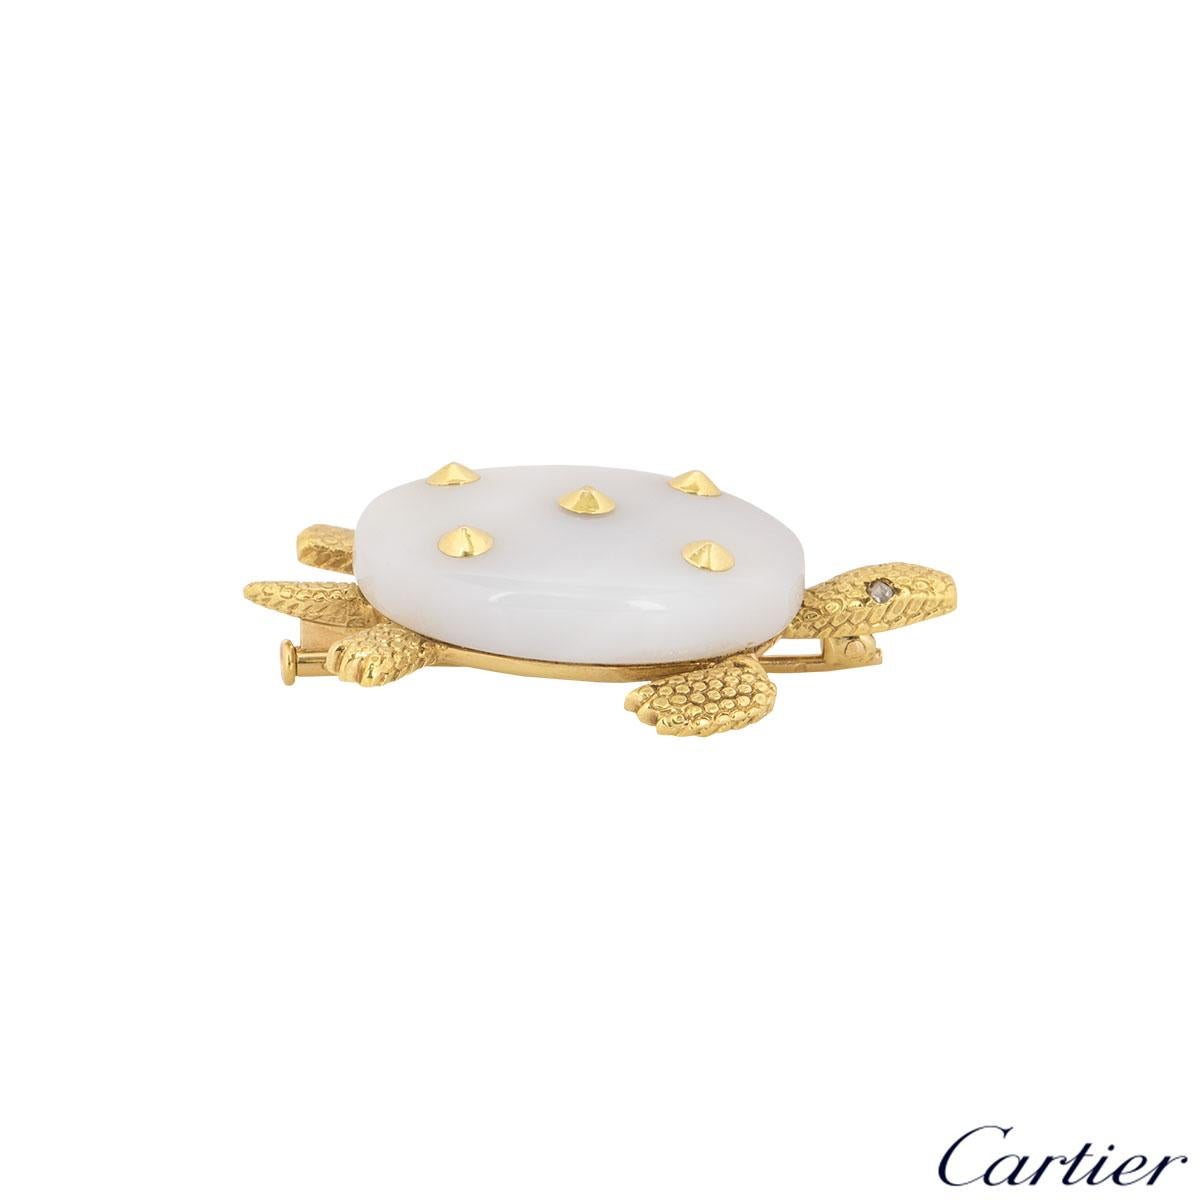 An 18k yellow gold chalcedony brooch by Cartier. The brooch is set in a design of a turtle with a chalcedony shell accompanied by 5 yellow gold studs and textured yellow gold body with 2 rose cut diamonds for eyes with an approximate total weight of